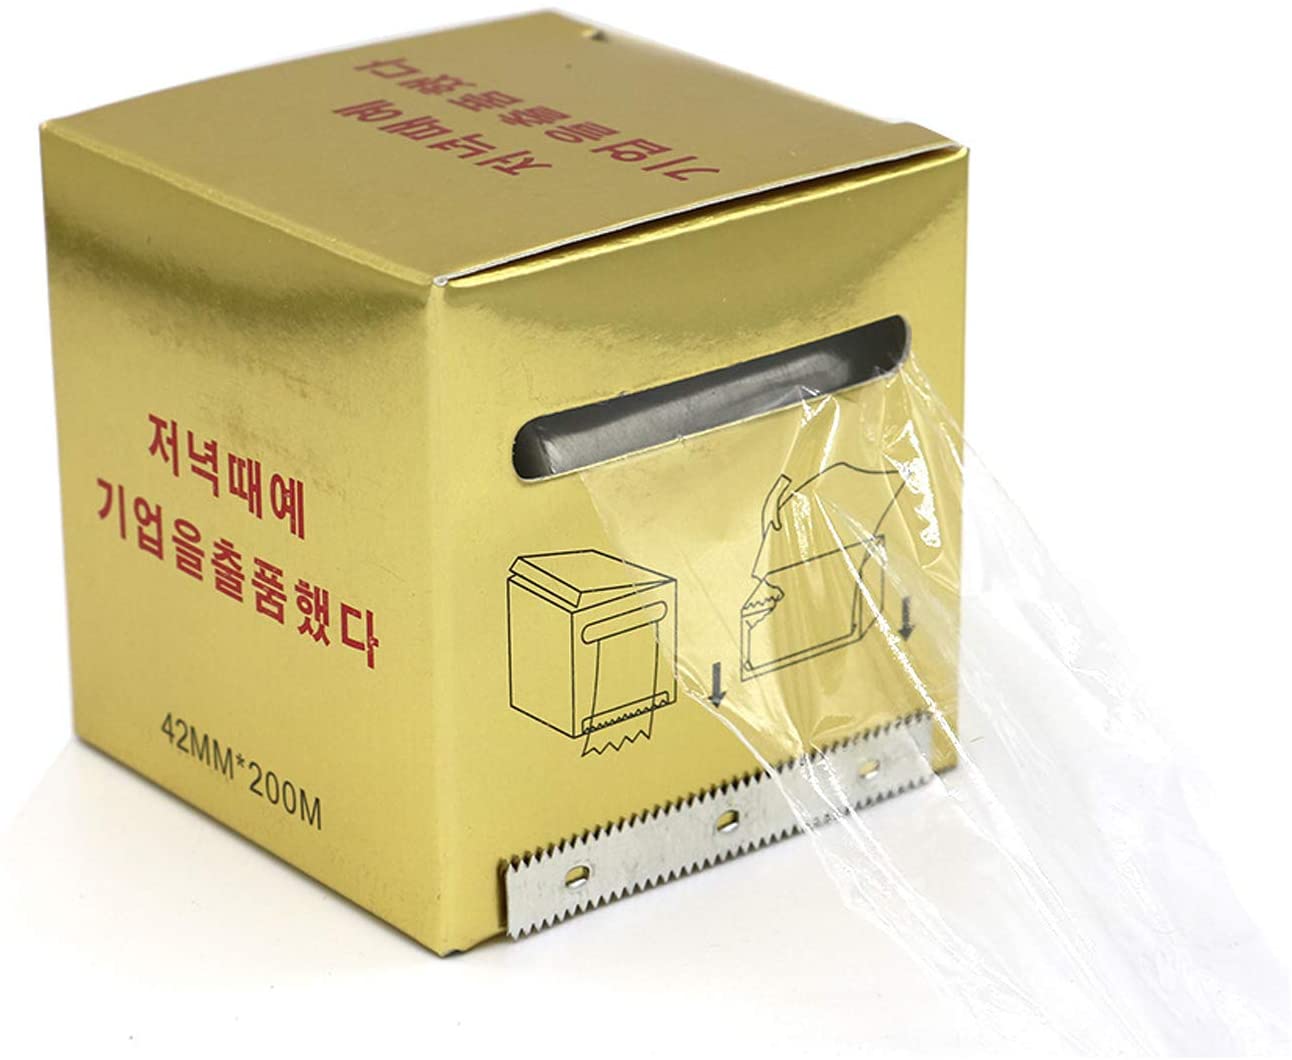 Plastic Cling Wrap Holder & Cutter